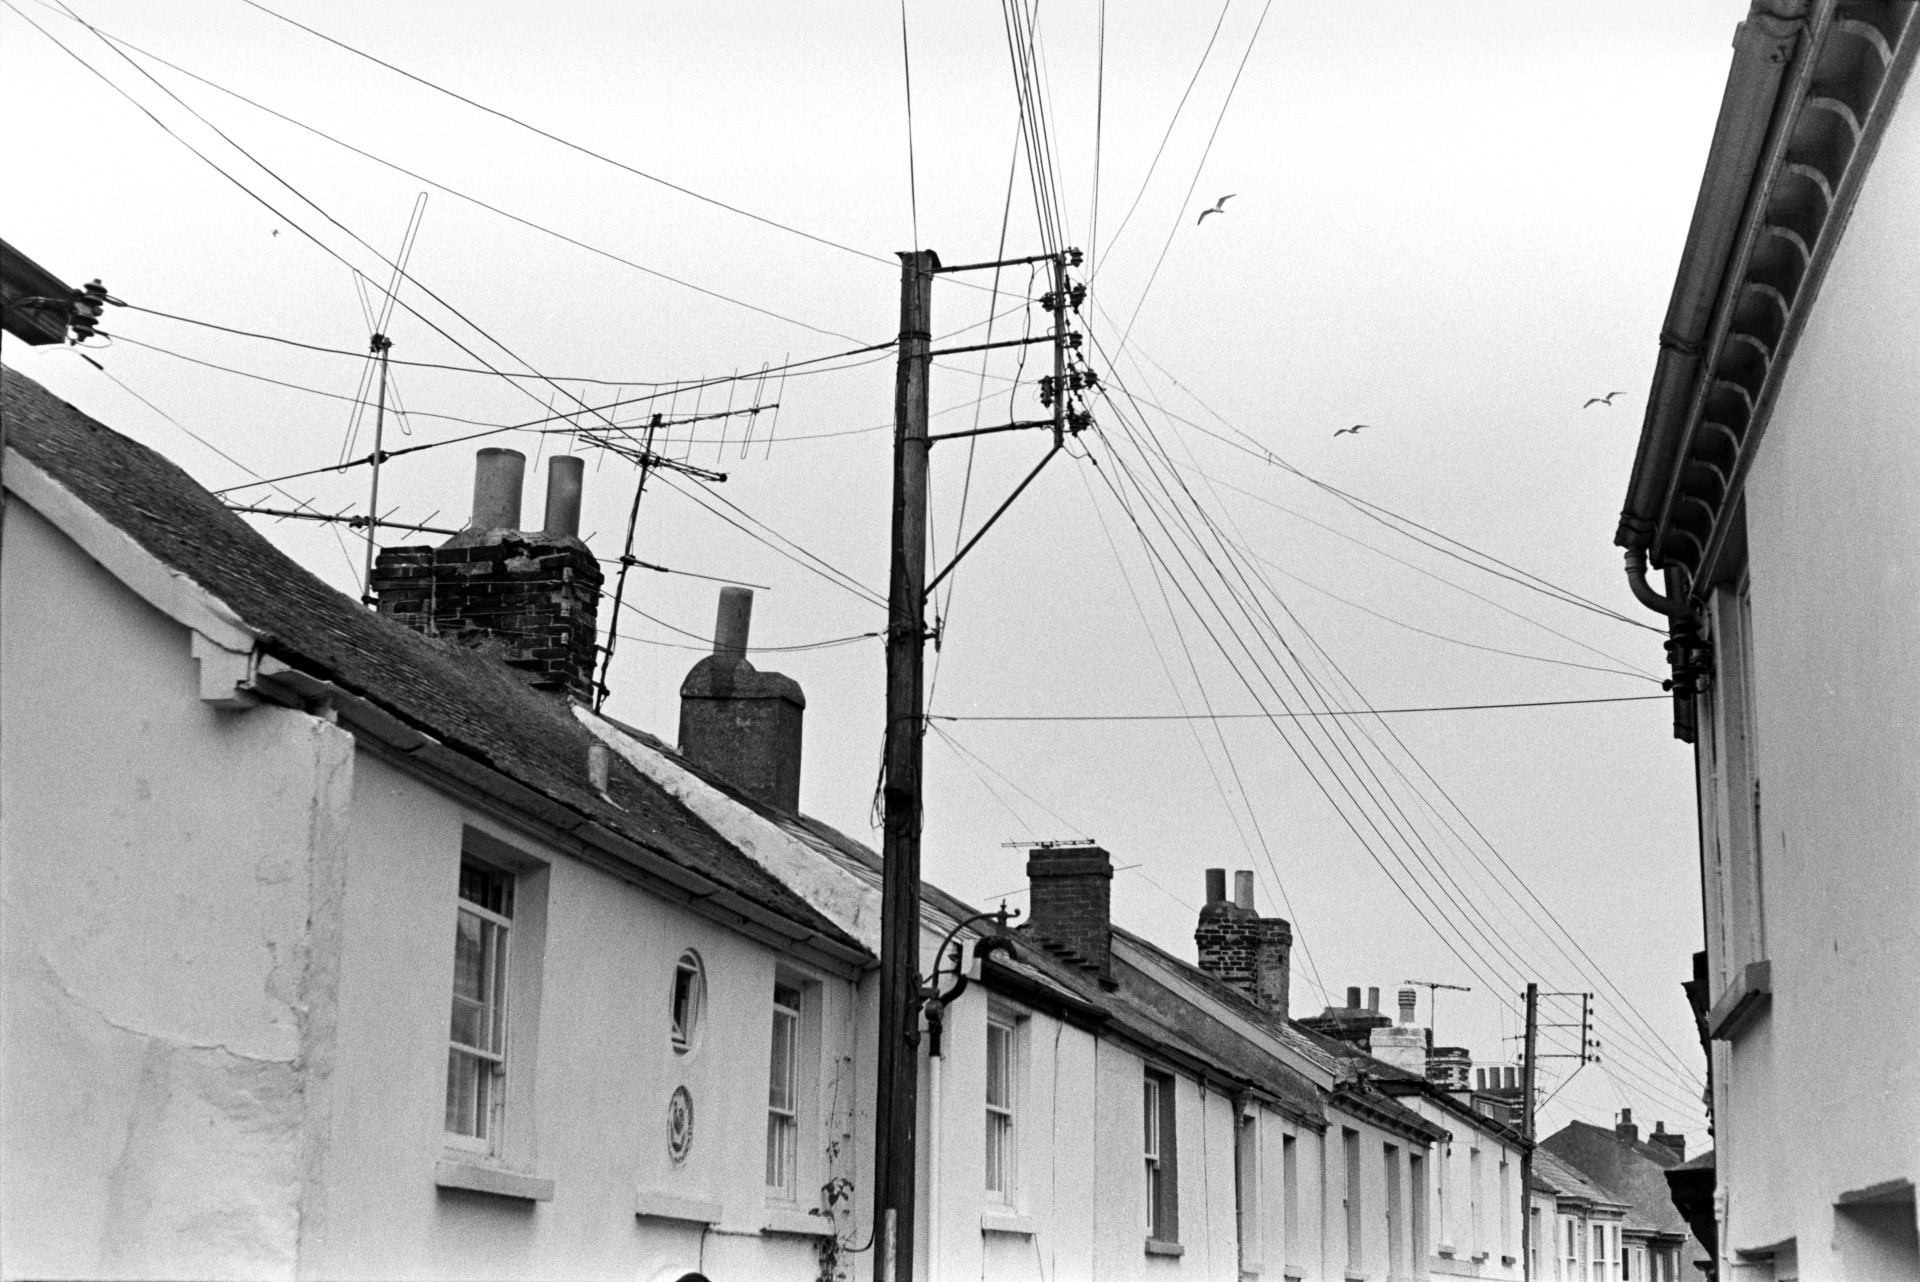 Telegraph poles in a terraced street in Appledore. Chimneys are visible on the houses.